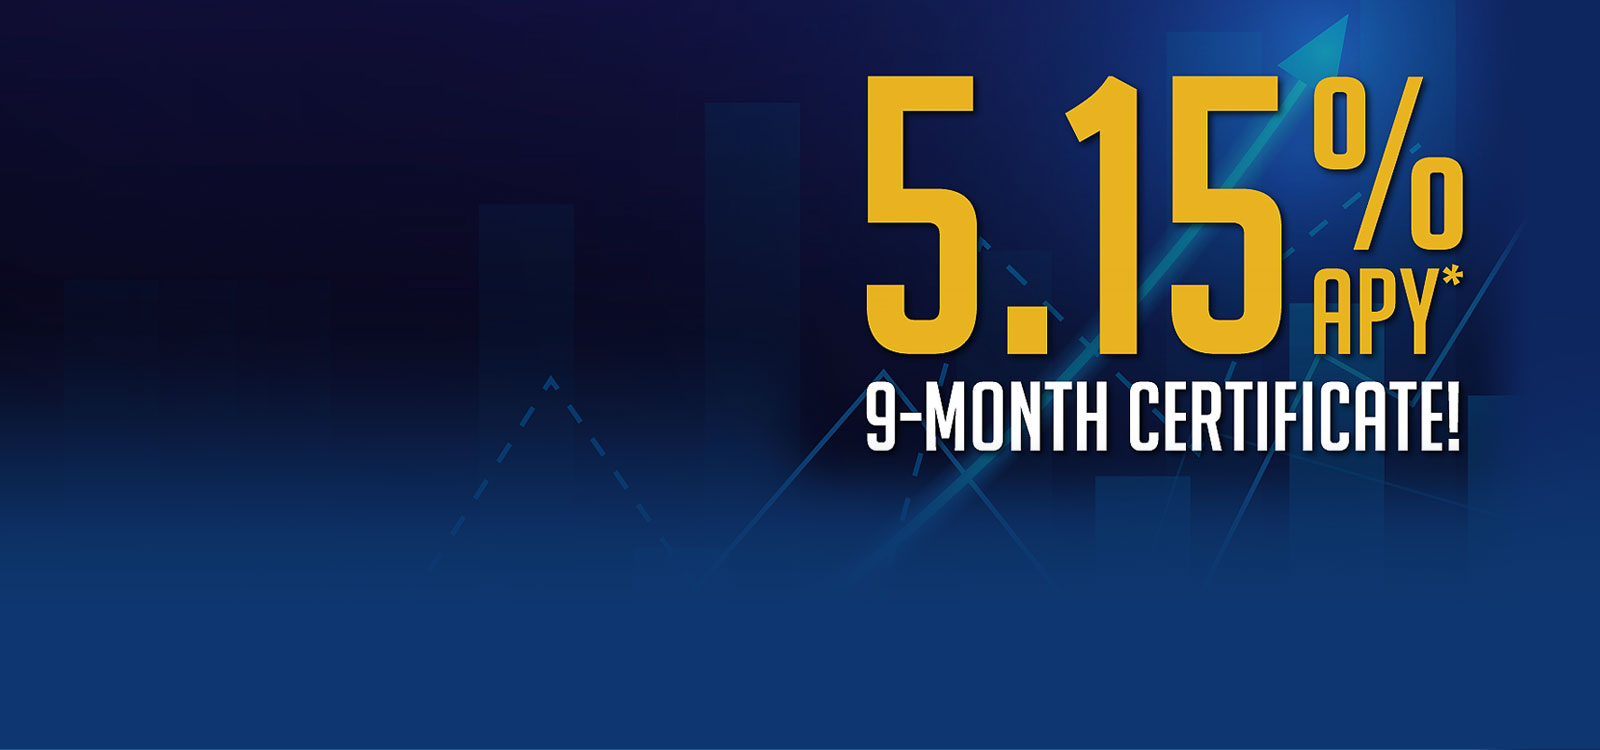 Arrow moving up graphic with a 5.15% 9 month wording